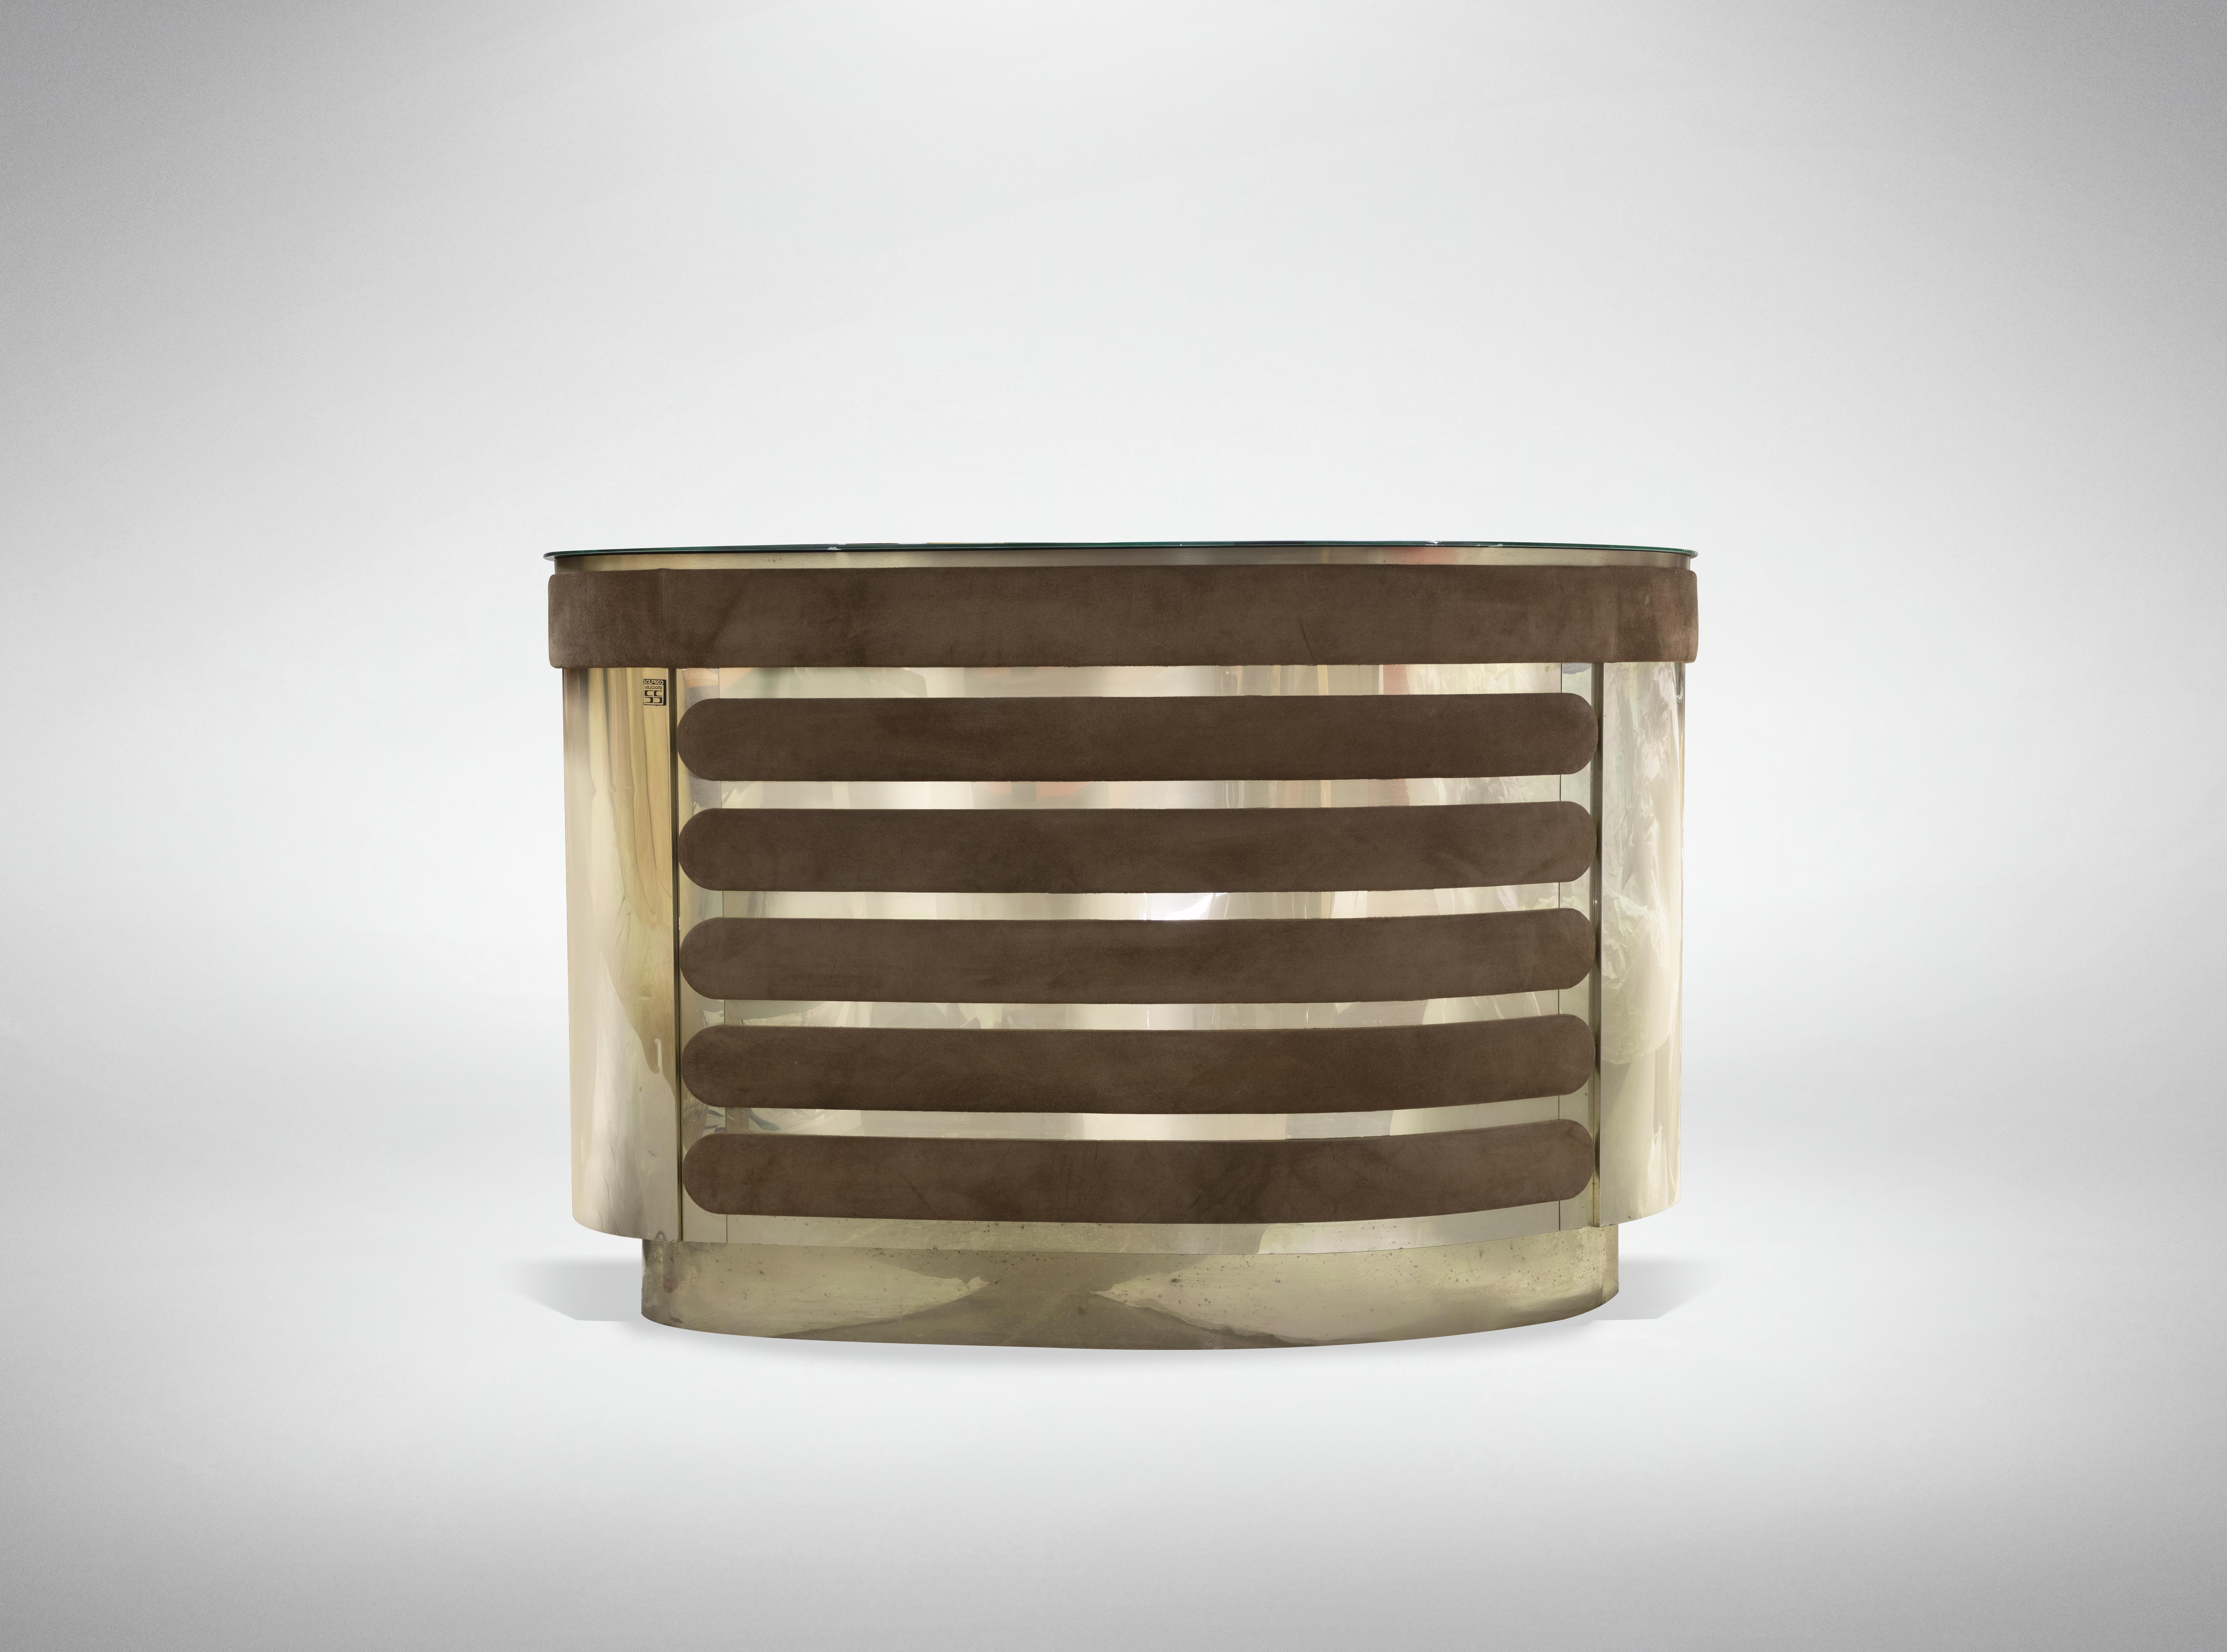 Vintage dry bar designed by Willy Rizzo in the 1970s. Brown suede, golden bars.

The set includes: illuminated shelves, a counter with a mirrored glass top, chrome sides, a suede front panel in the original suede, all in working condition.